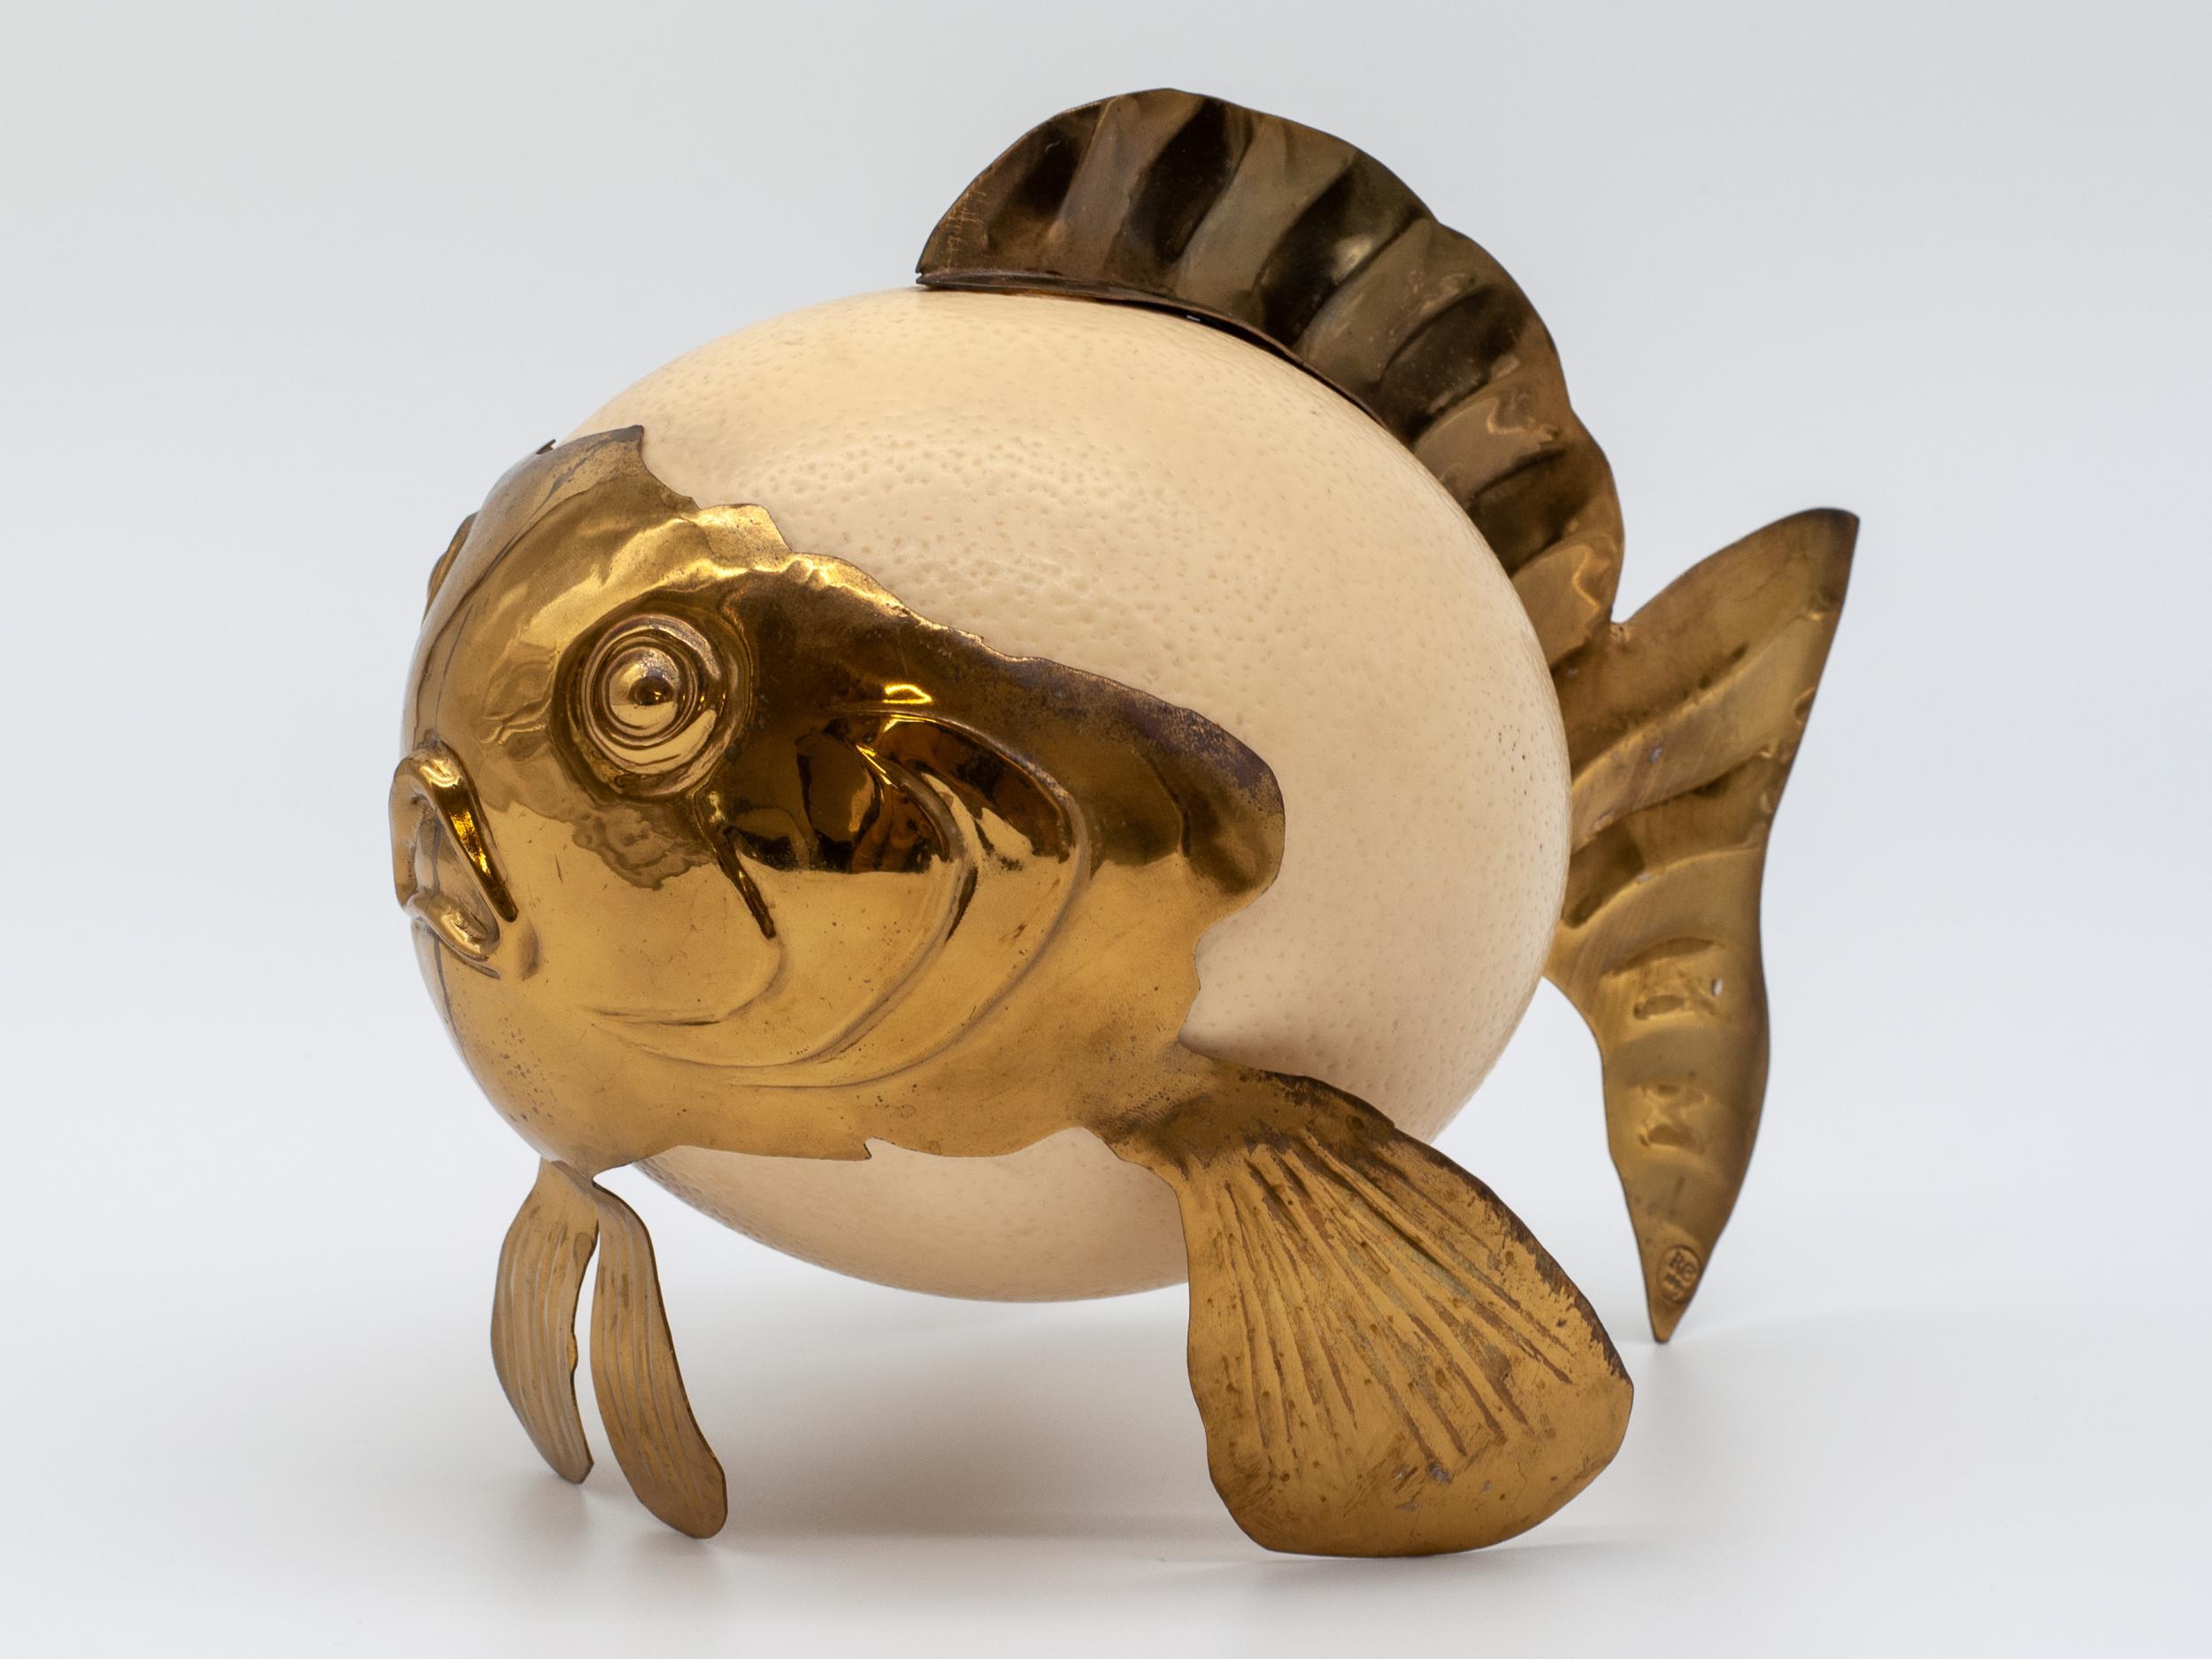 A makers mark dates this unique creation to the 1860s. Of unknown origin, this ostrich egg was transformed into a blowfish using brass fins and facial features. Resting on it's fins it has a prominent face. In good condition, extremely fragile.